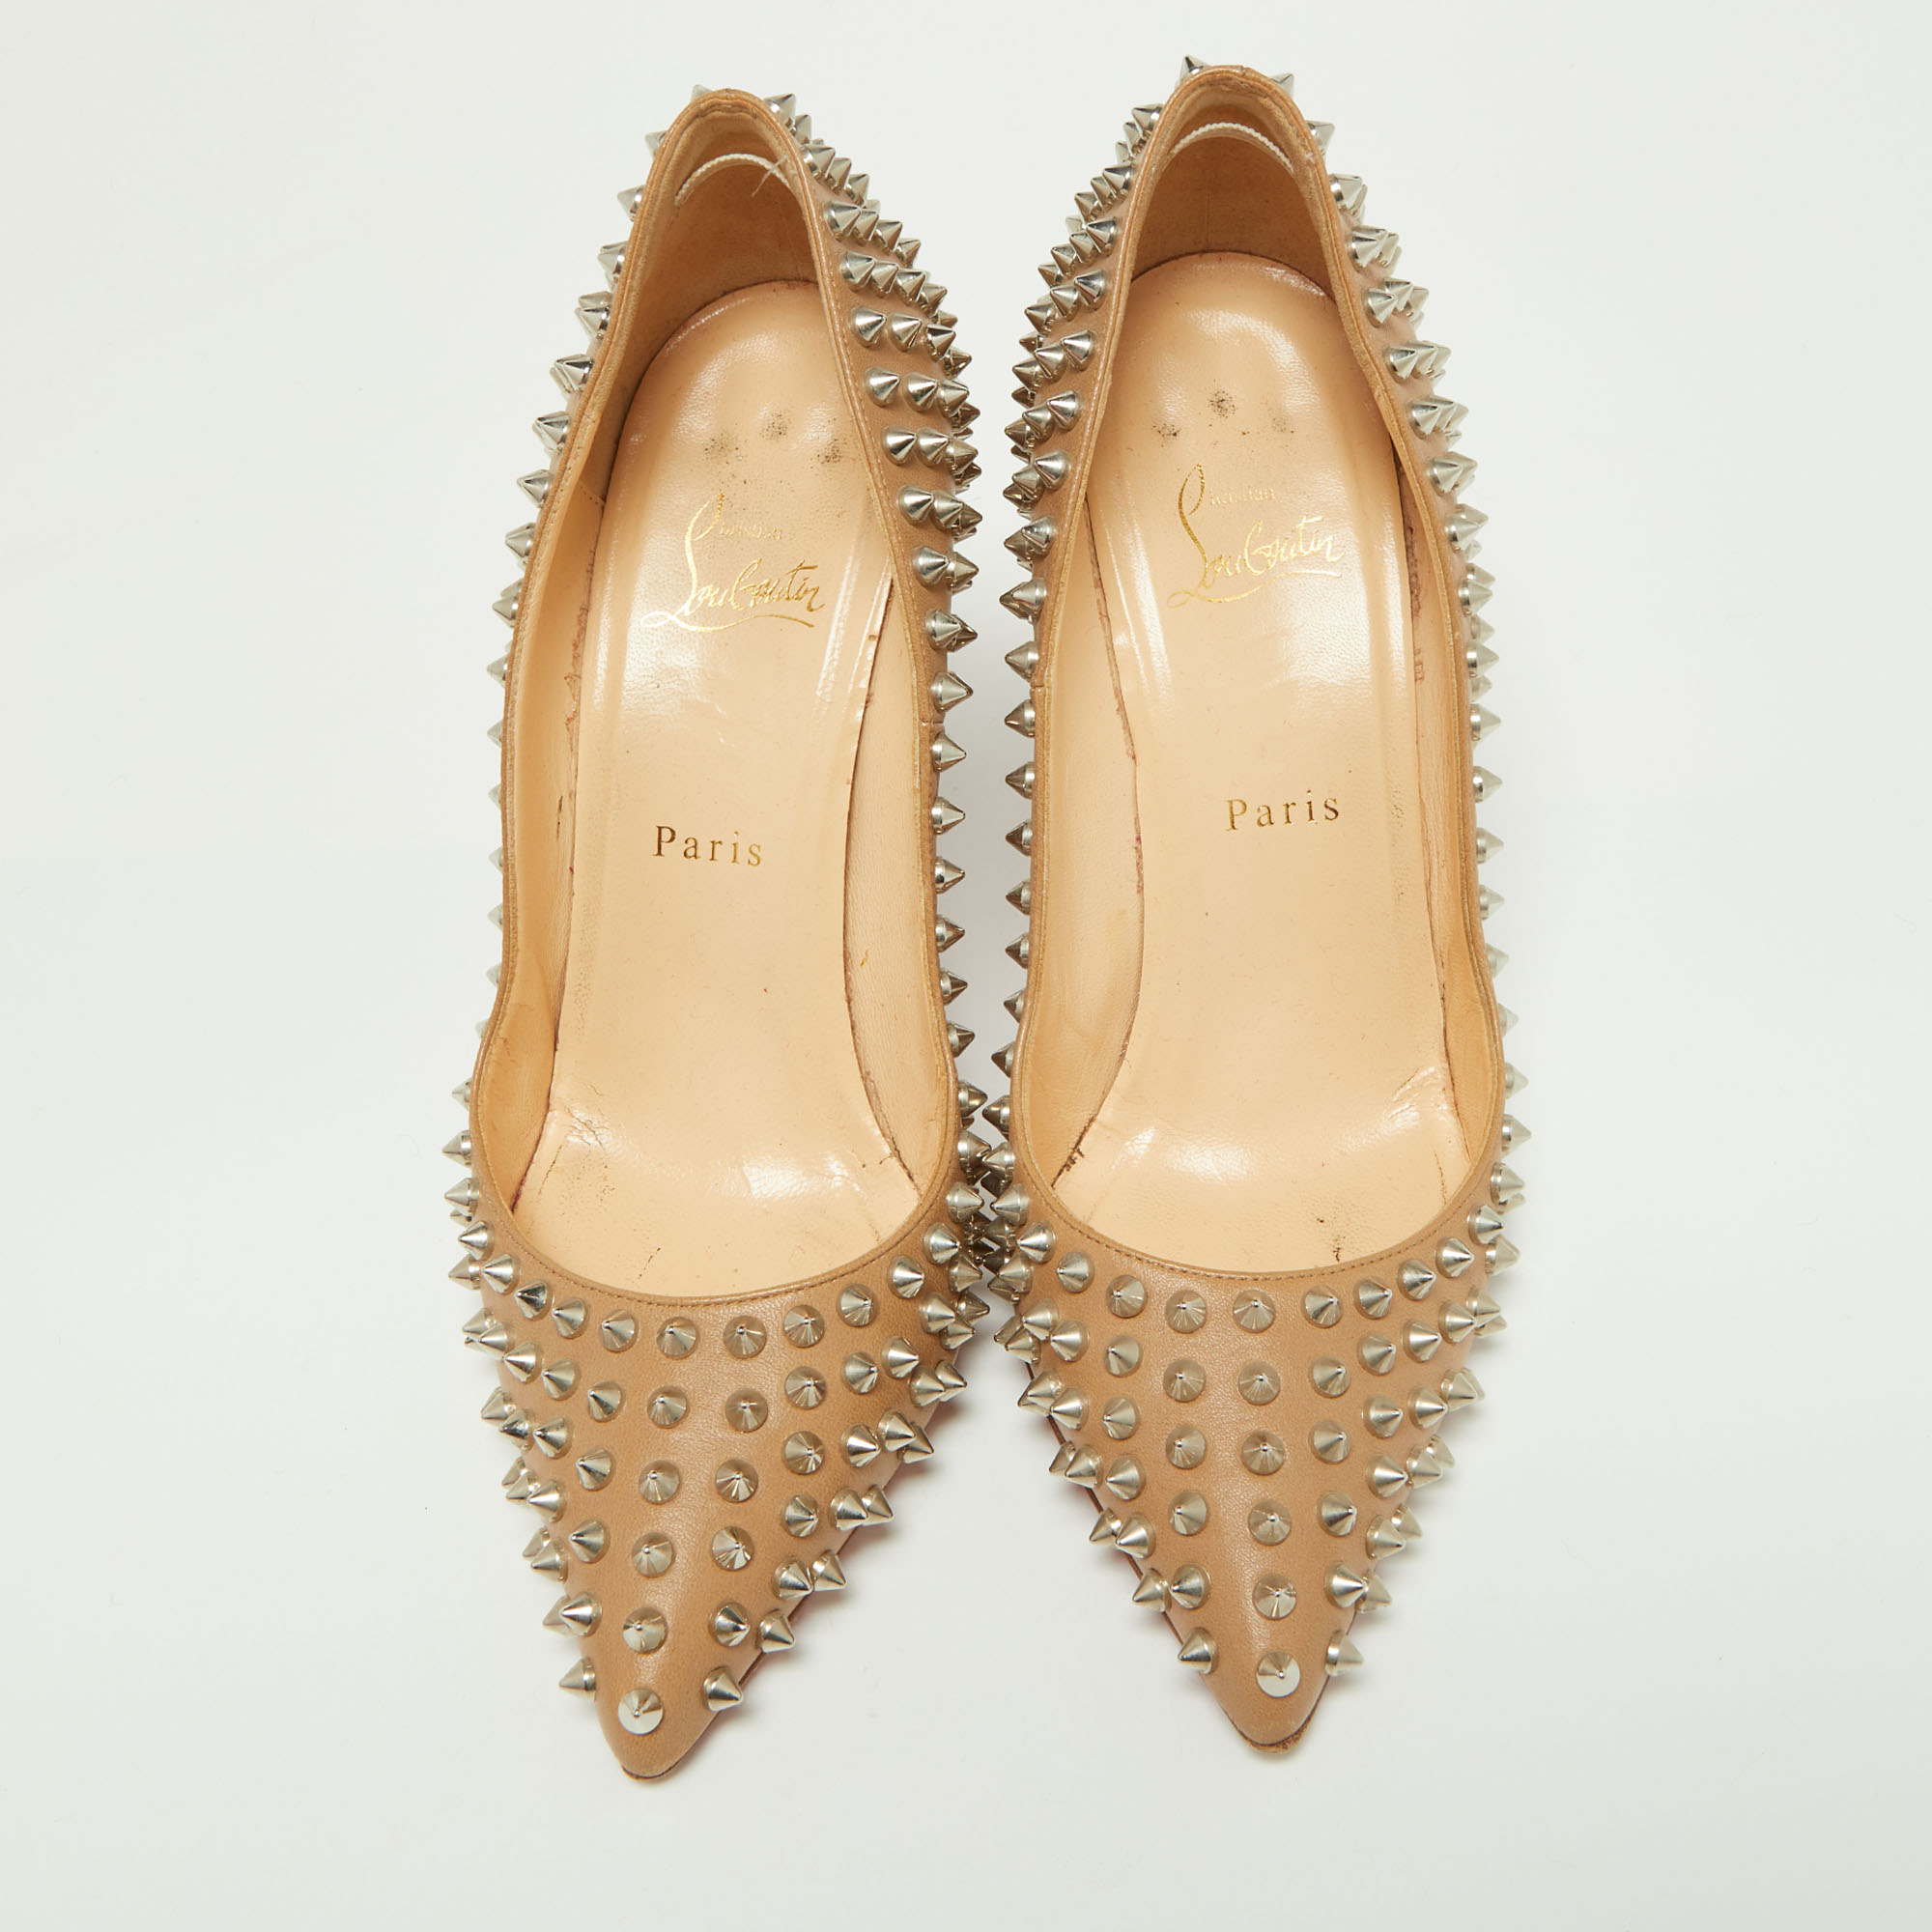 Christian Louboutin Beige Leather Pigalle Spikes Pumps Size 39.5